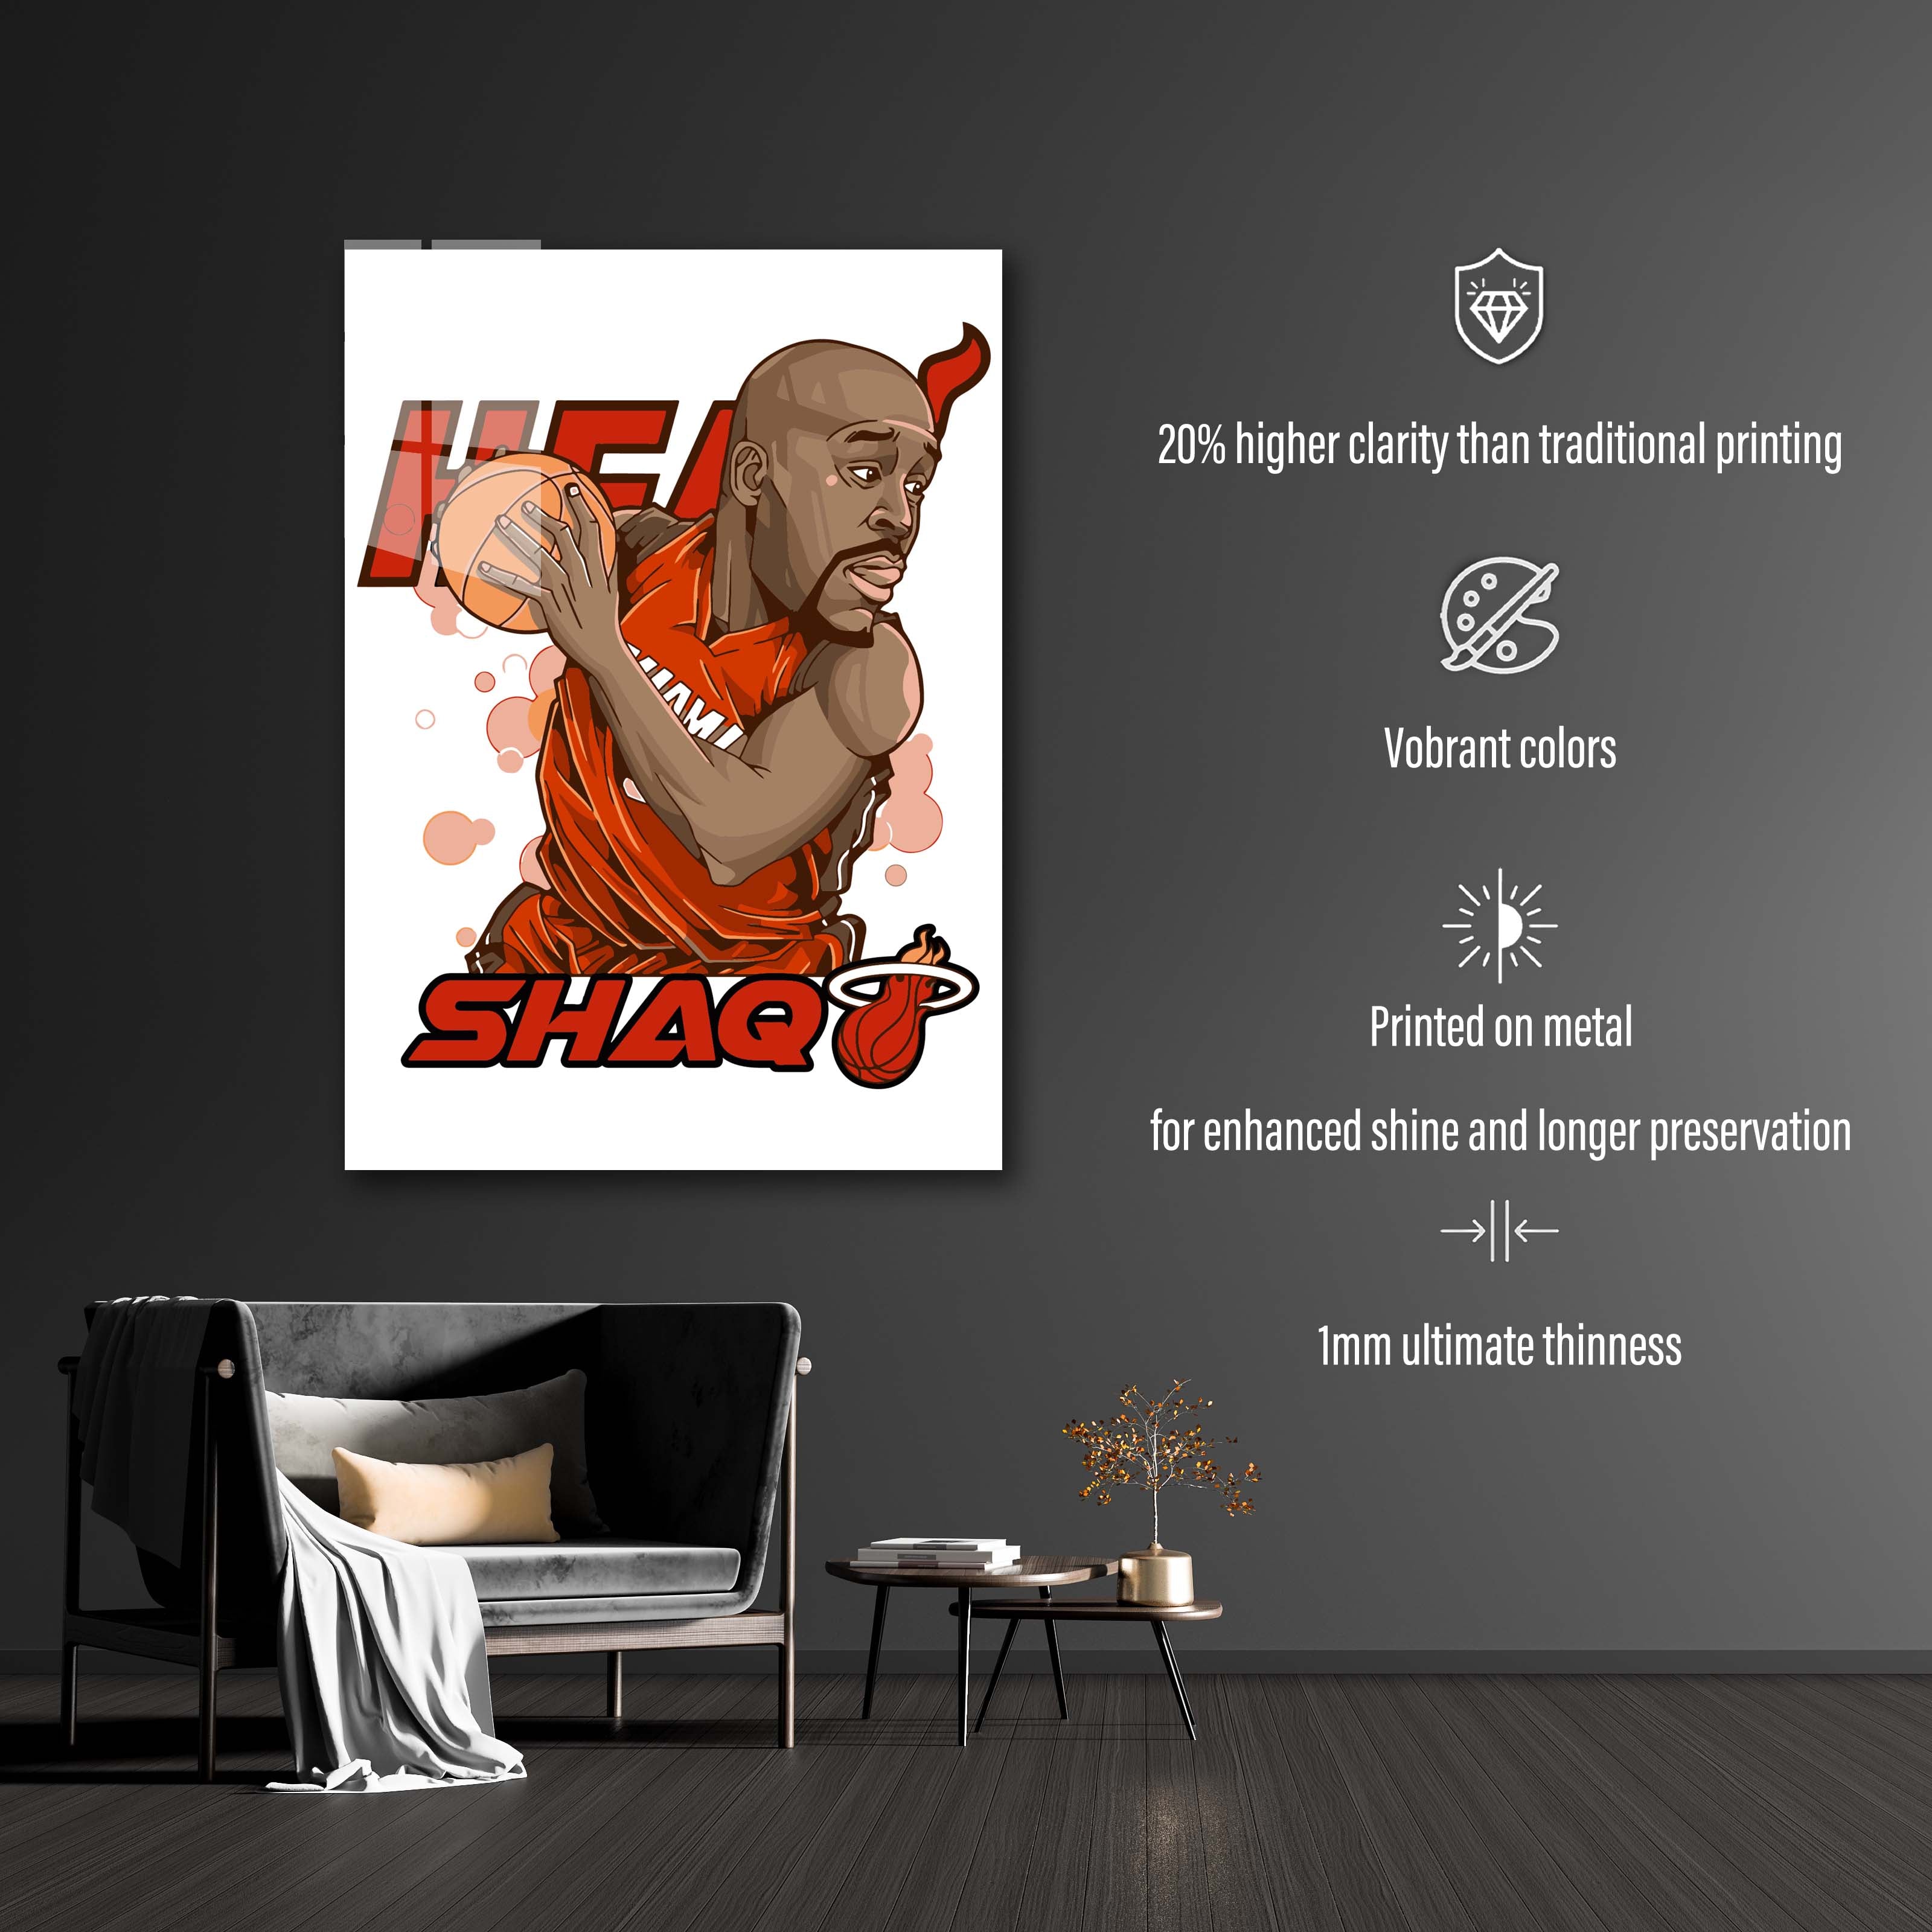 Shaquille O'Neal-designed by @My Kido Art